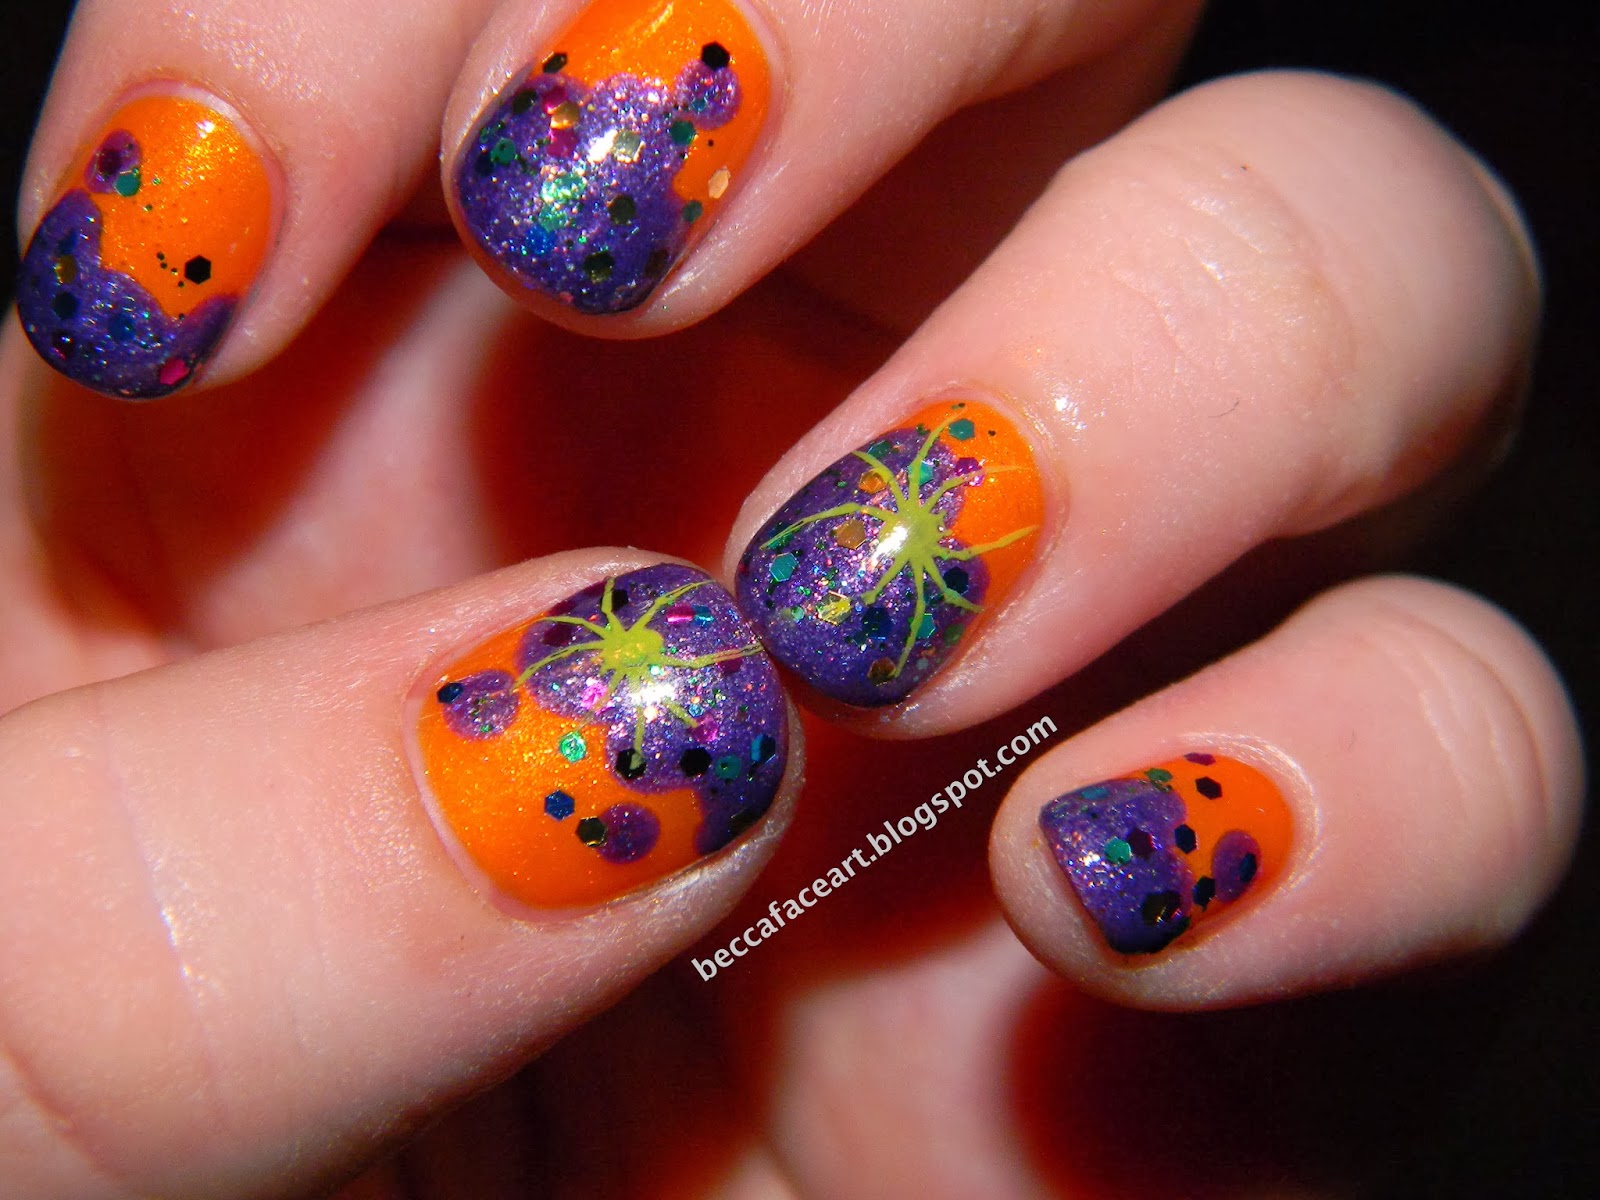 Becca Face Nail Art: Halloween Witch's Brew/Magic Slime Nails